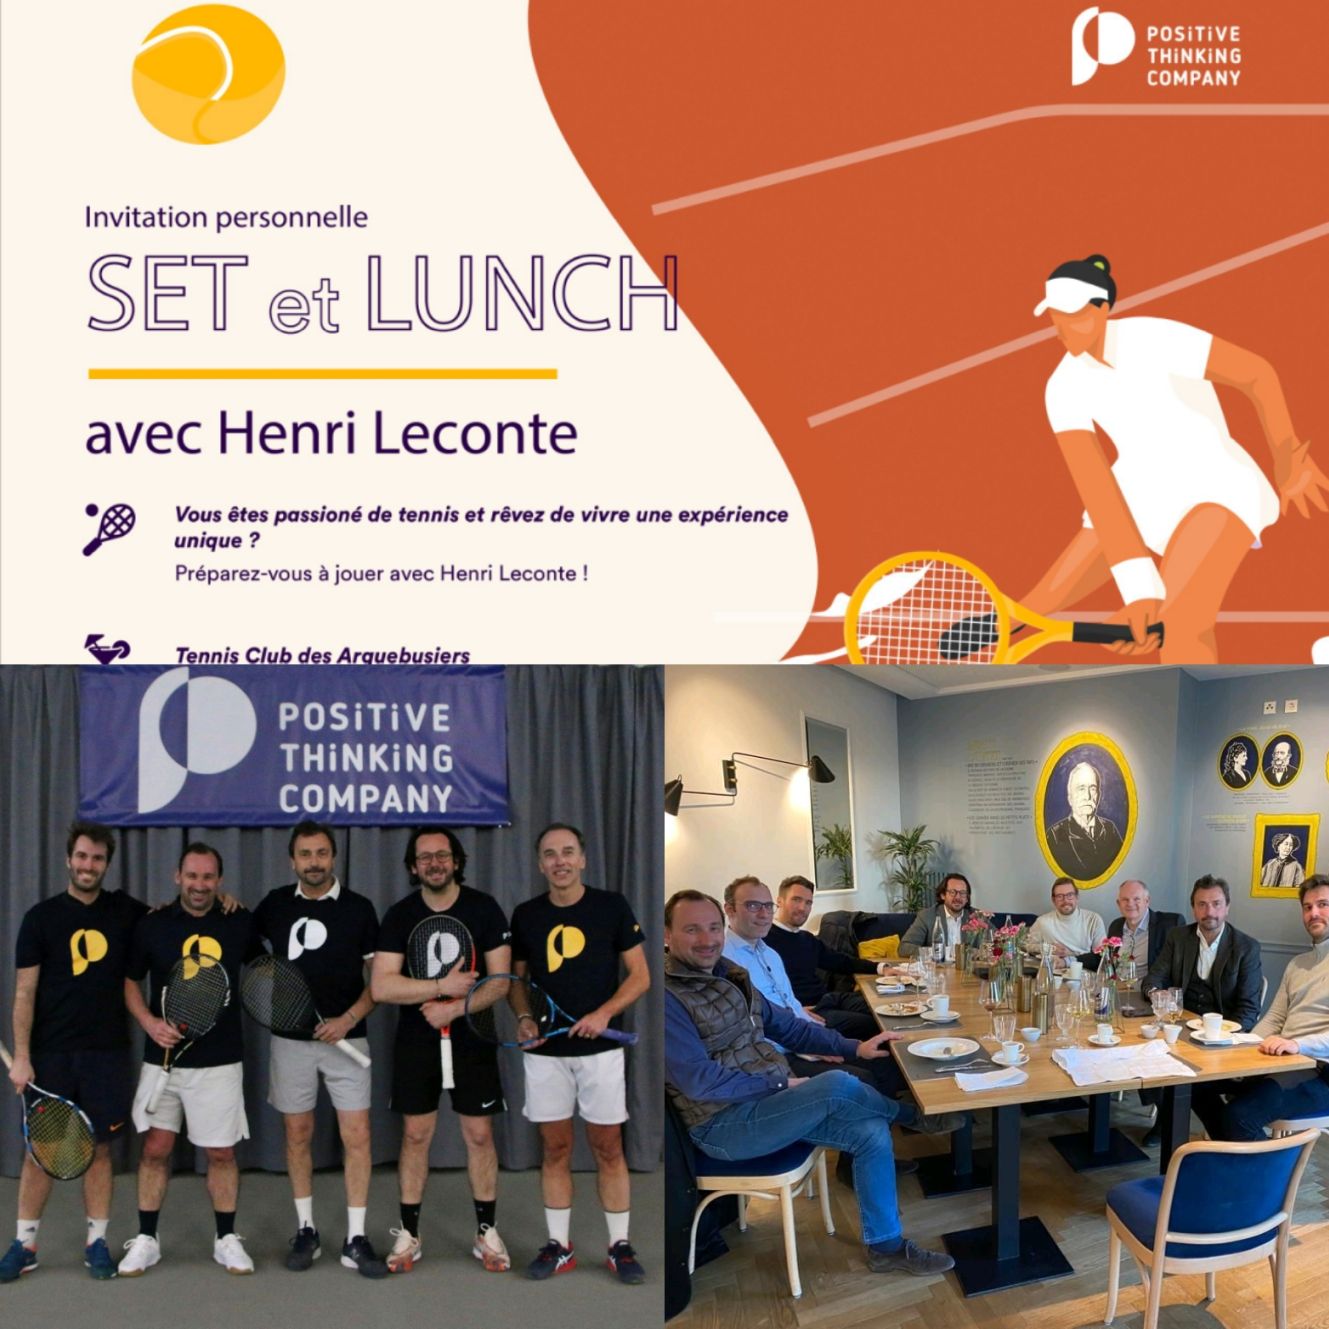 HL&Co - Luxembourg - event - tennis